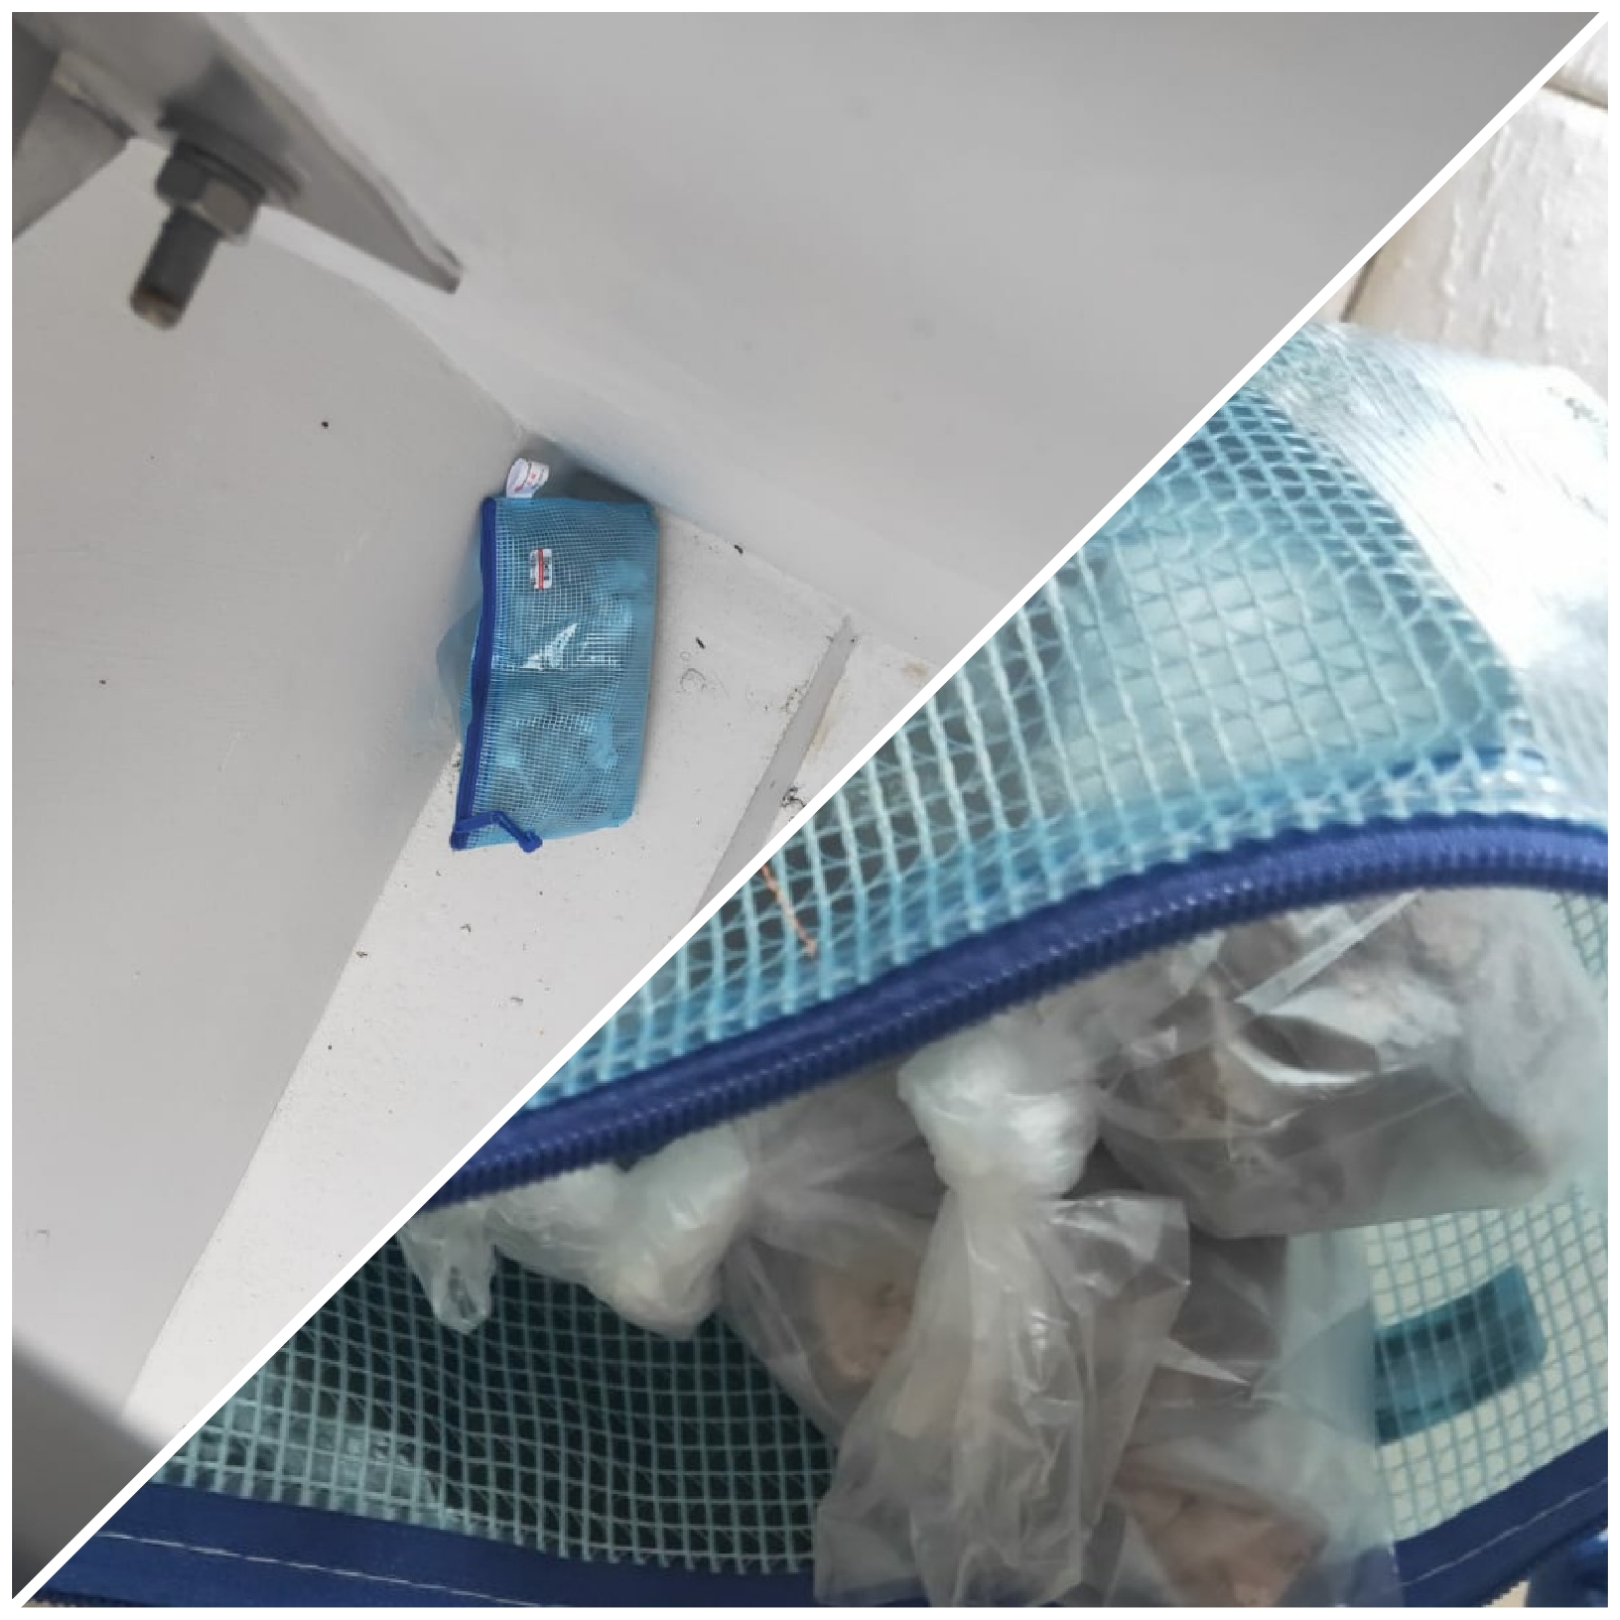 Photo 4 (CNB): Some of the drugs recovered in the vicinity of Ang Mo Kio Avenue 1  during CNB’s operation on 13 February 2020